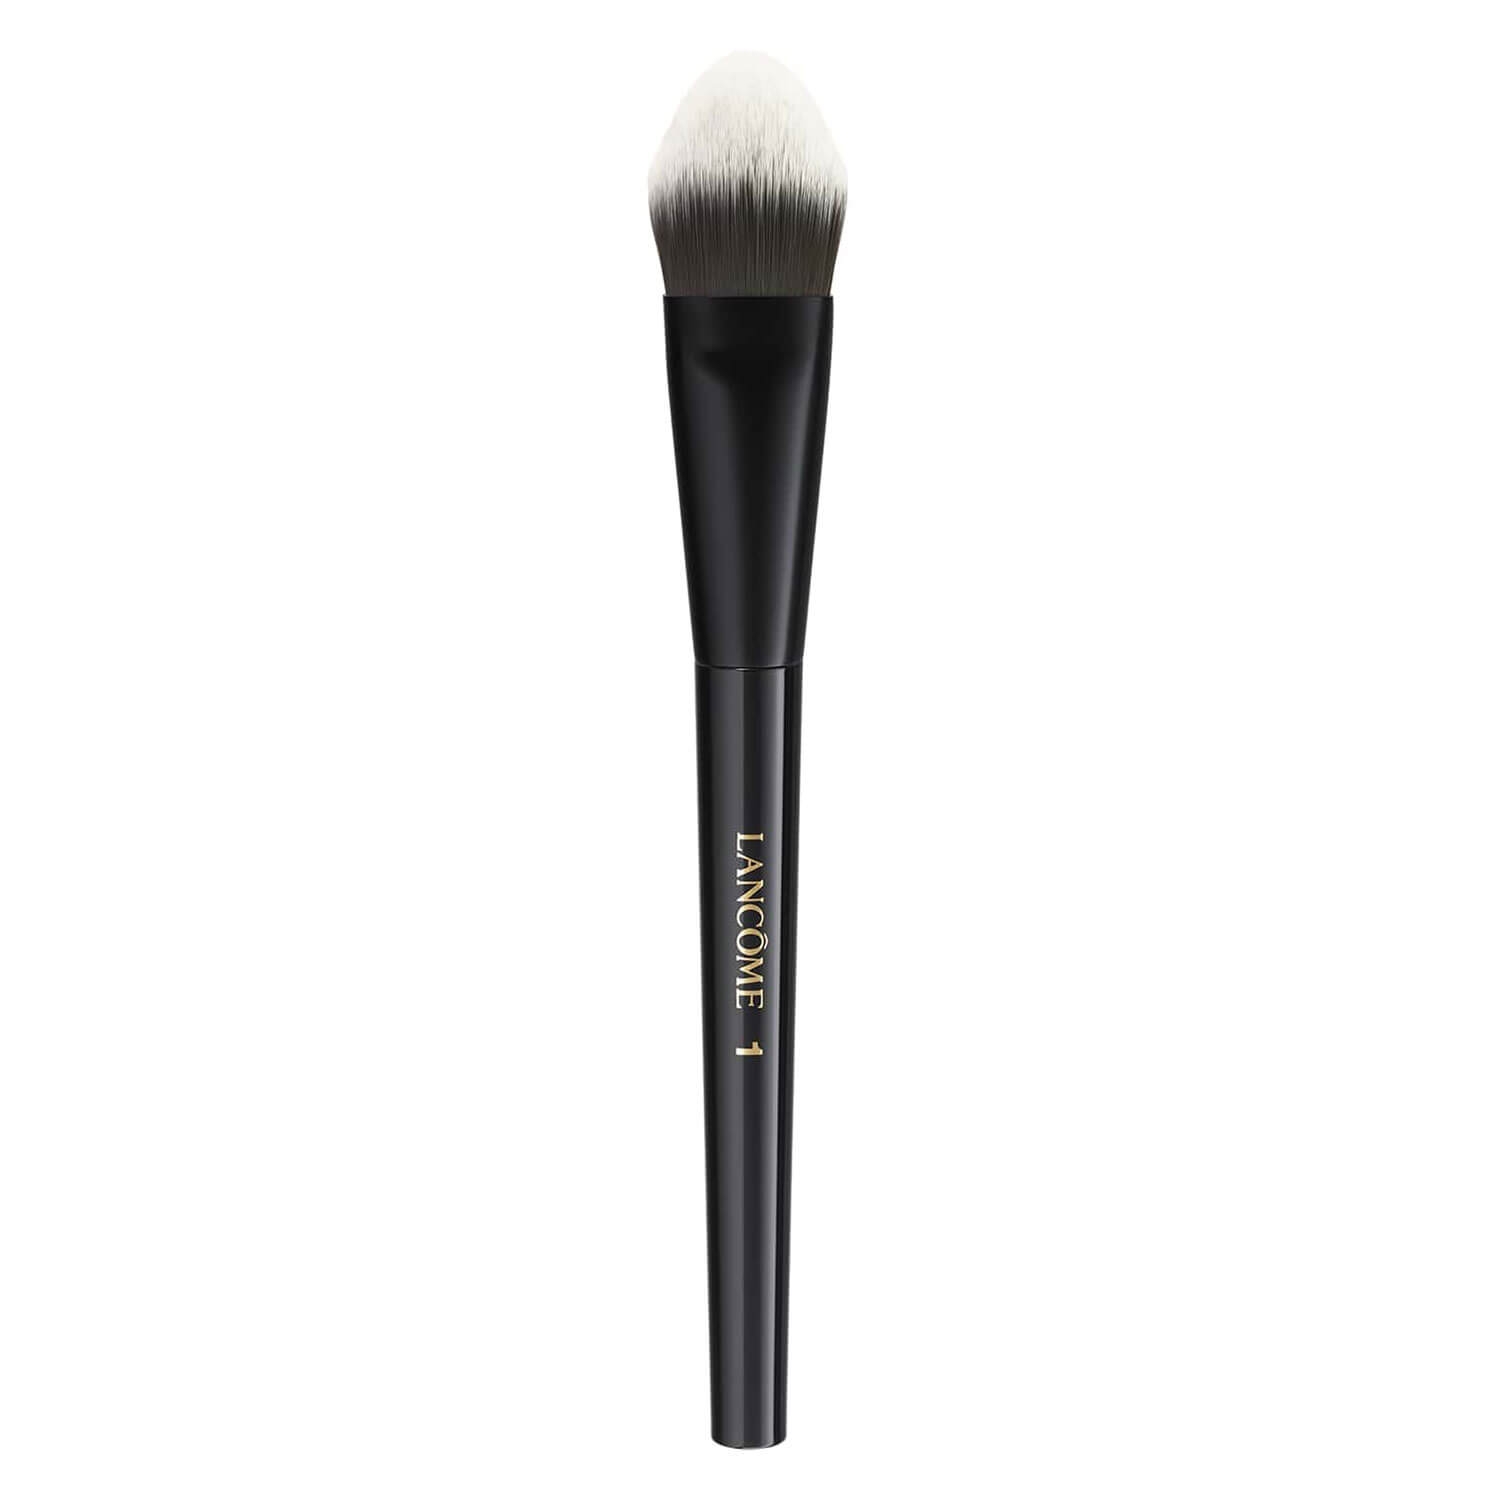 Product image from Lancôme Tools - Full Flat Foundation Brush 01